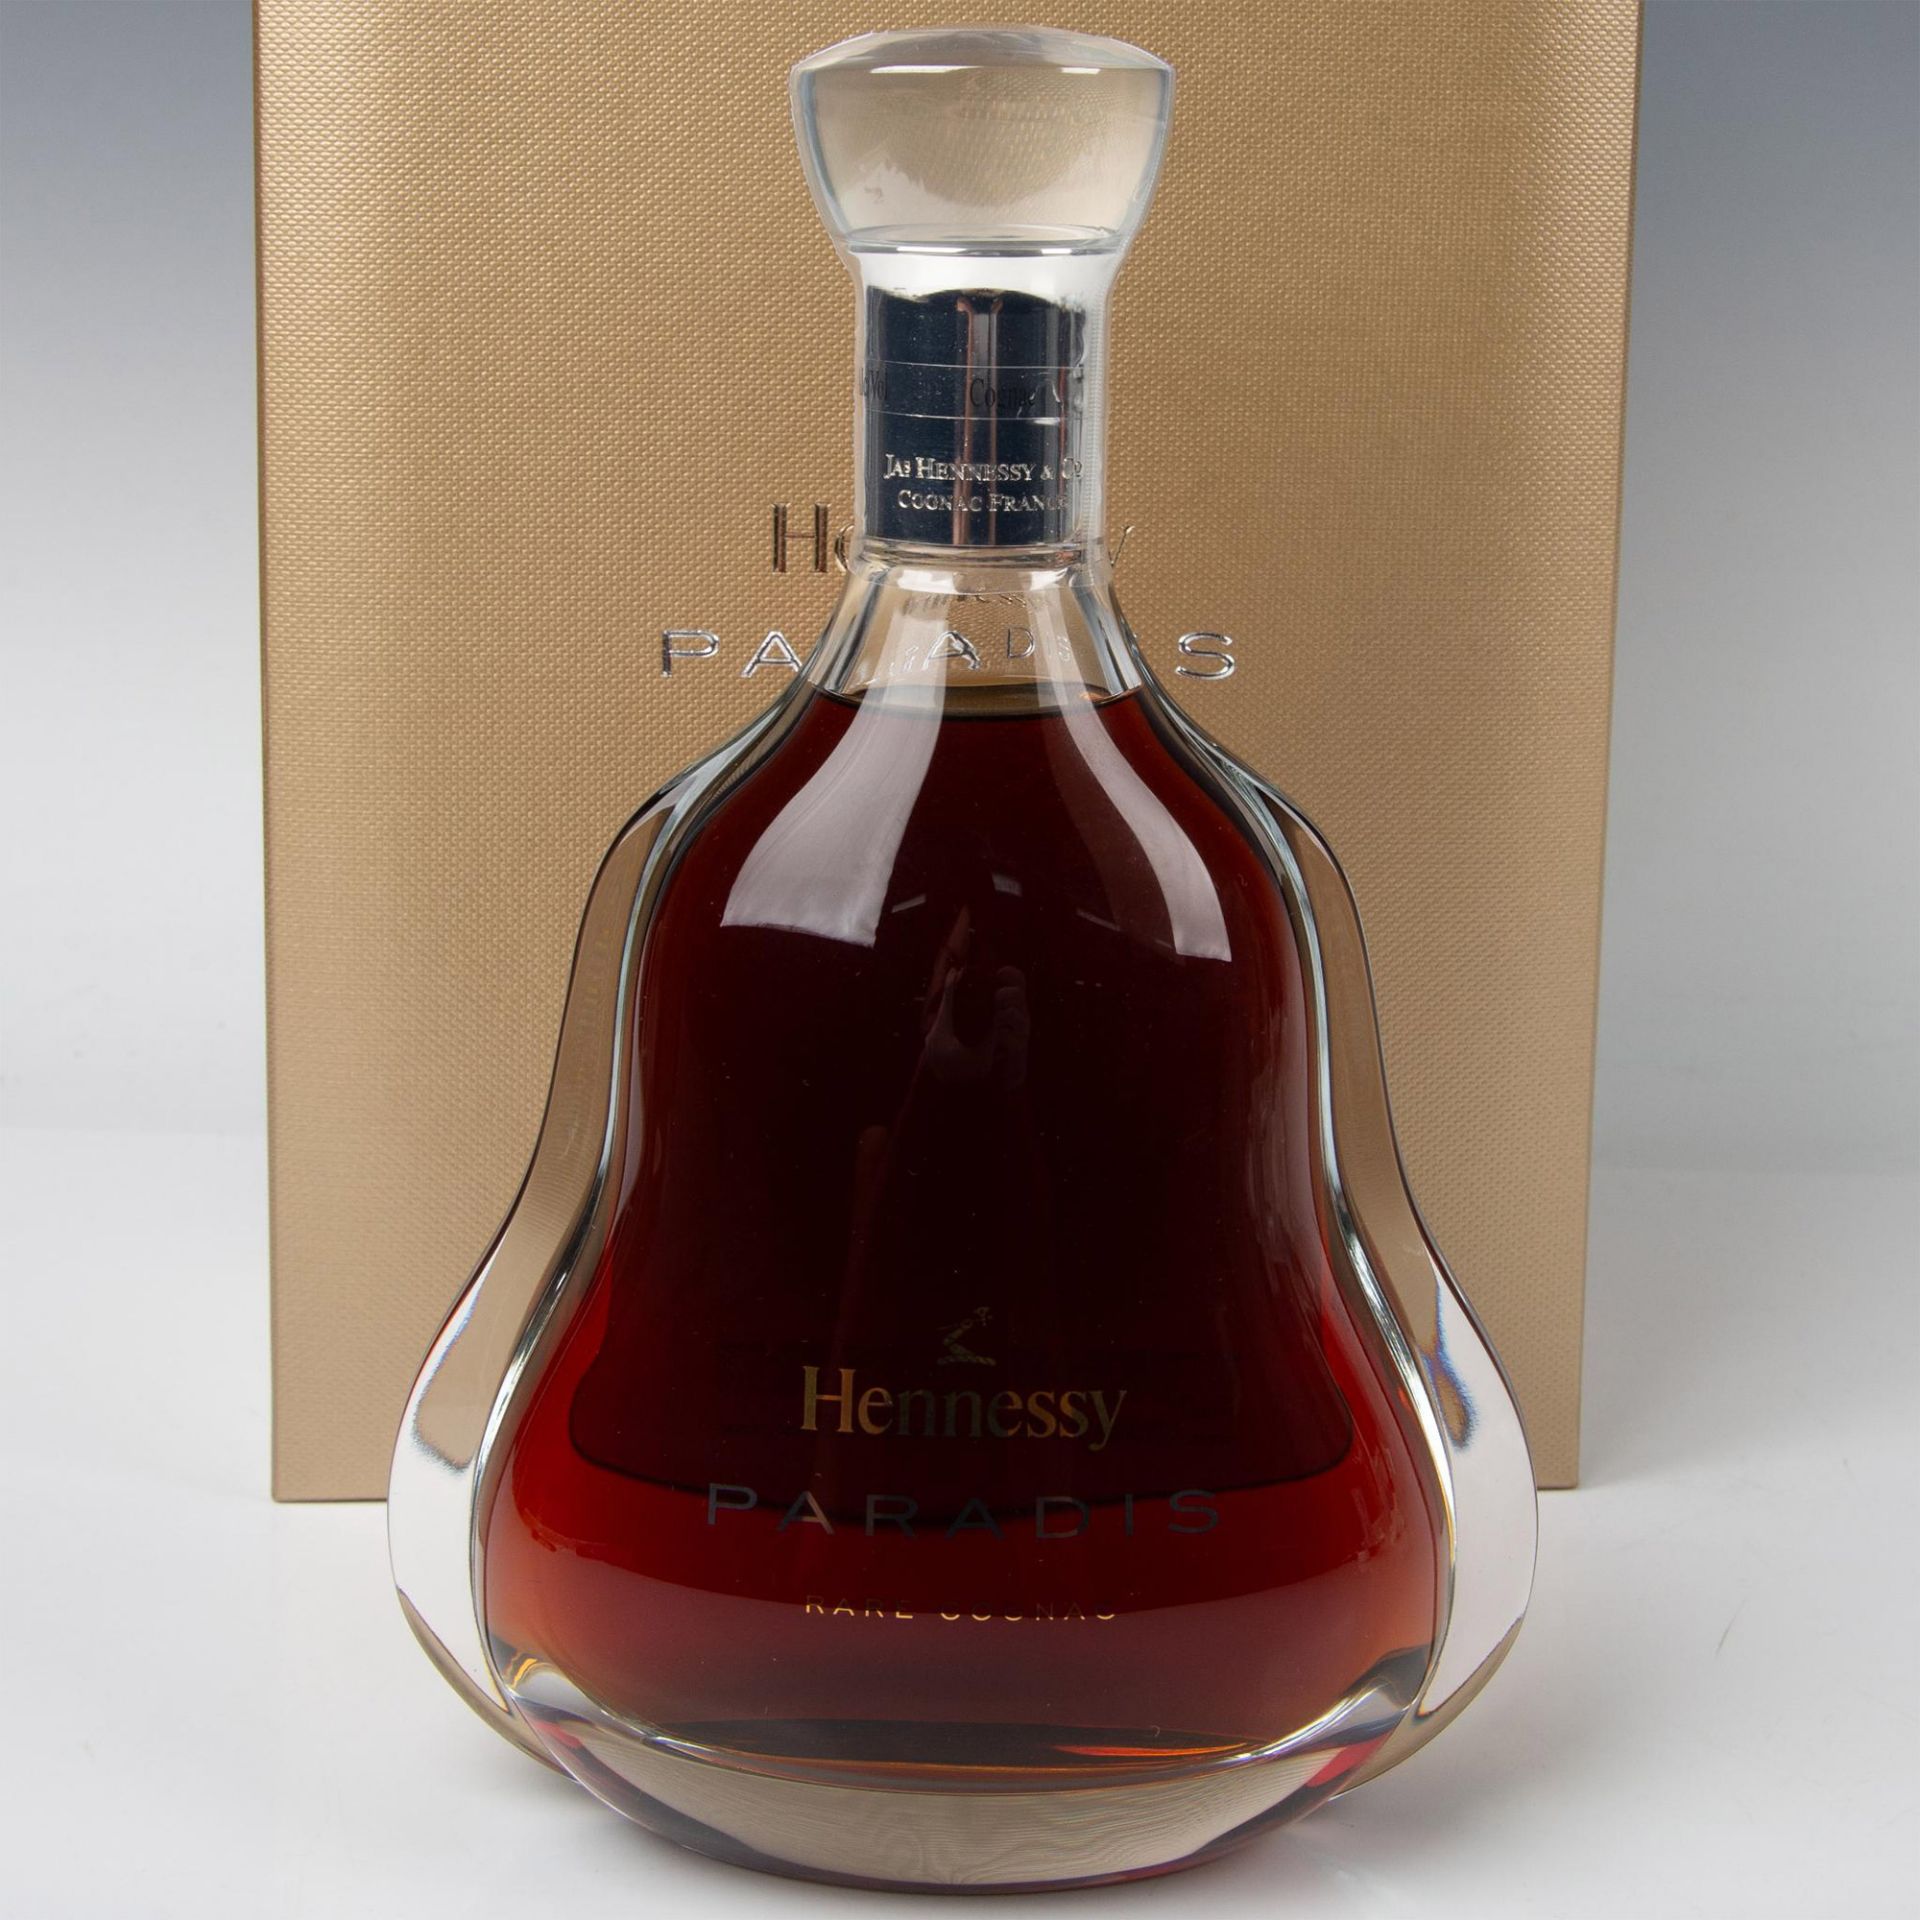 Hennessy Paradis Rare Cognac Sealed in Box - Image 8 of 19